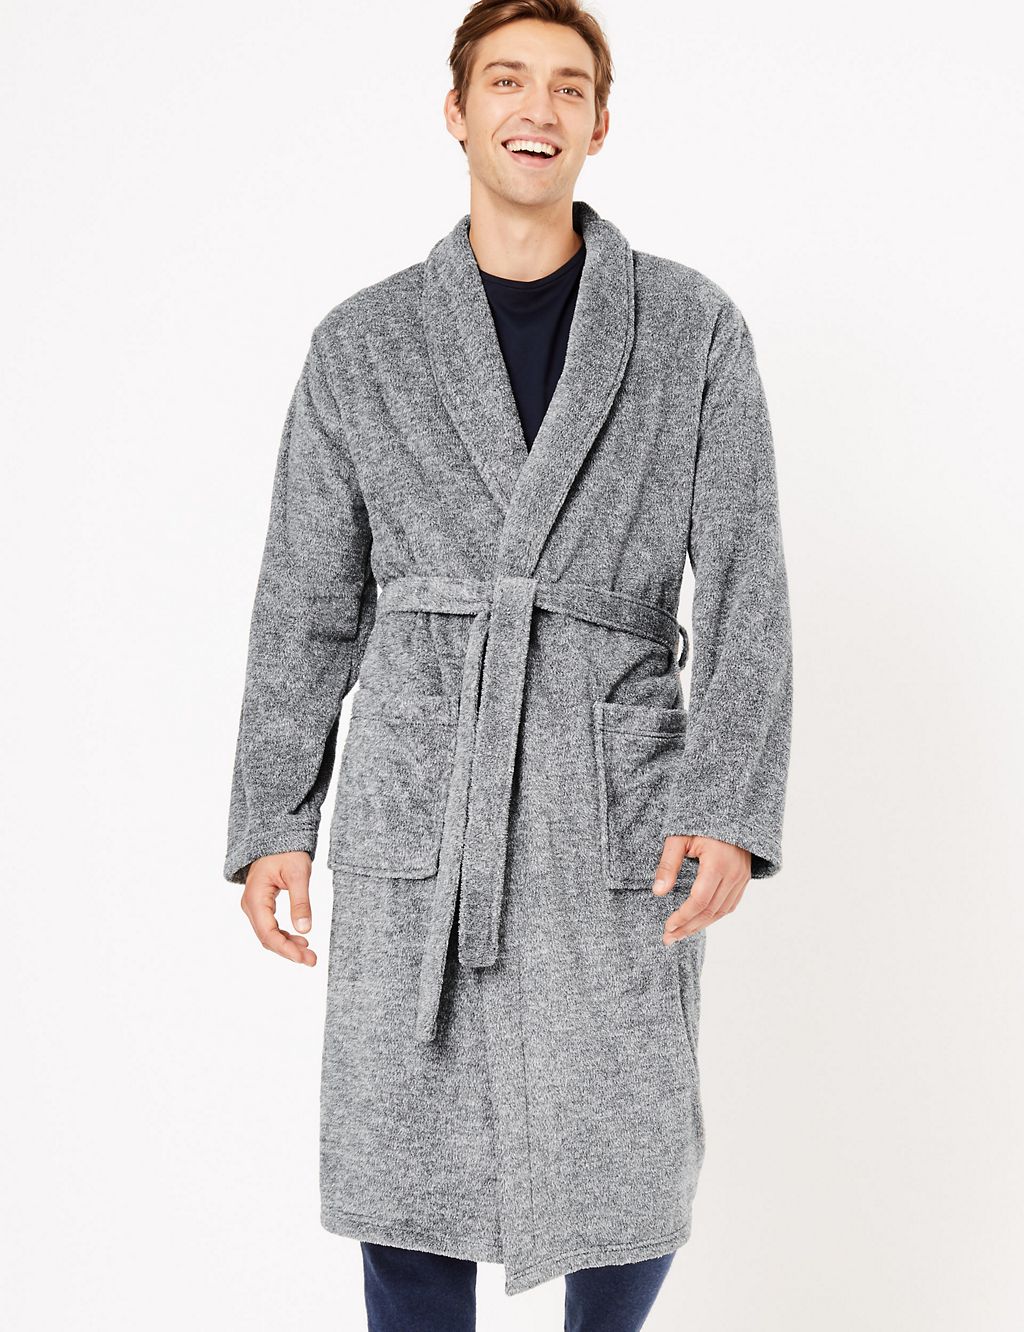 Supersoft Fleece Marl Gown 3 of 4